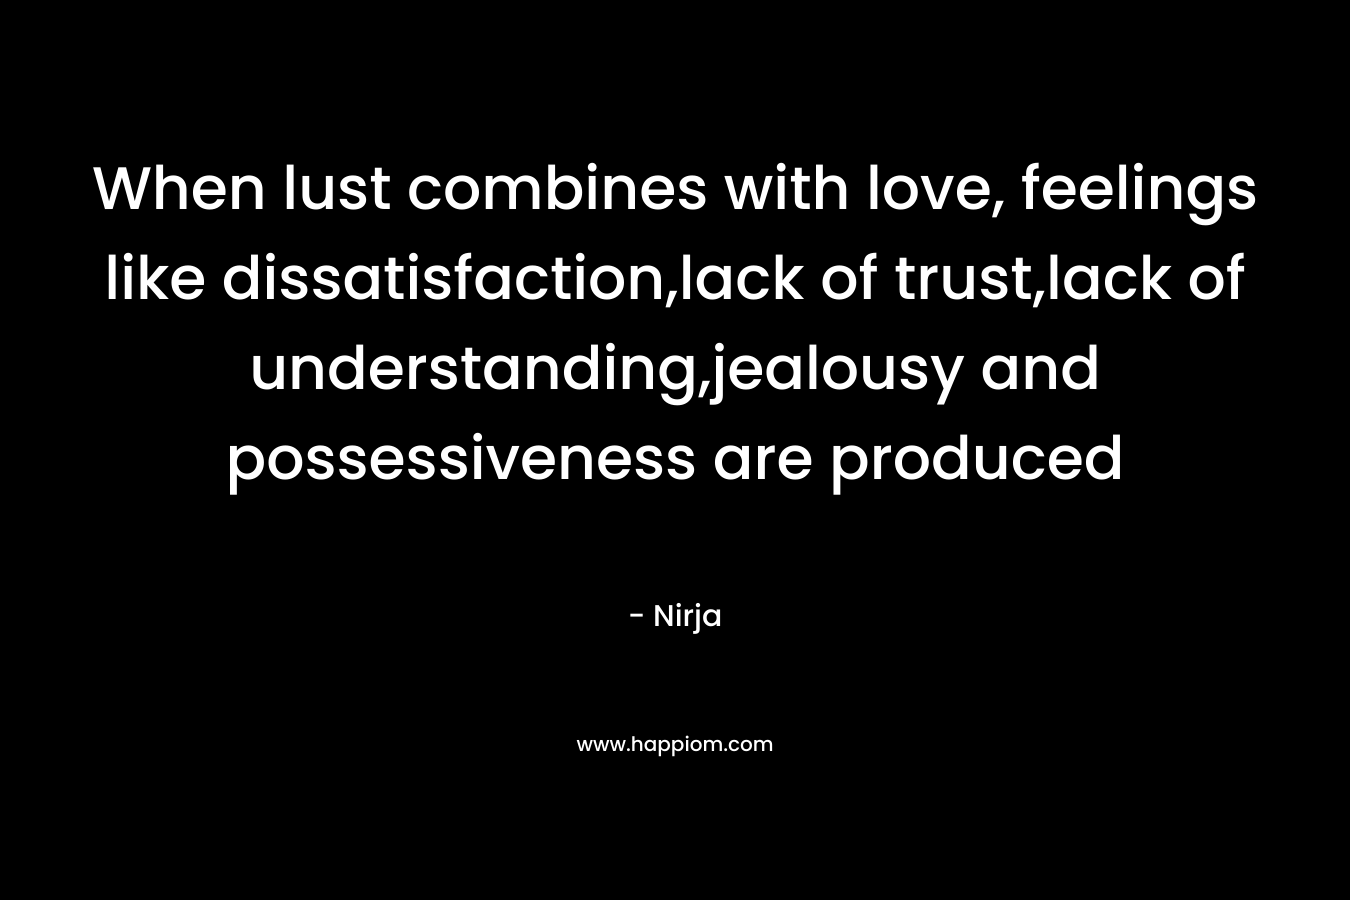 When lust combines with love, feelings like dissatisfaction,lack of trust,lack of understanding,jealousy and possessiveness are produced